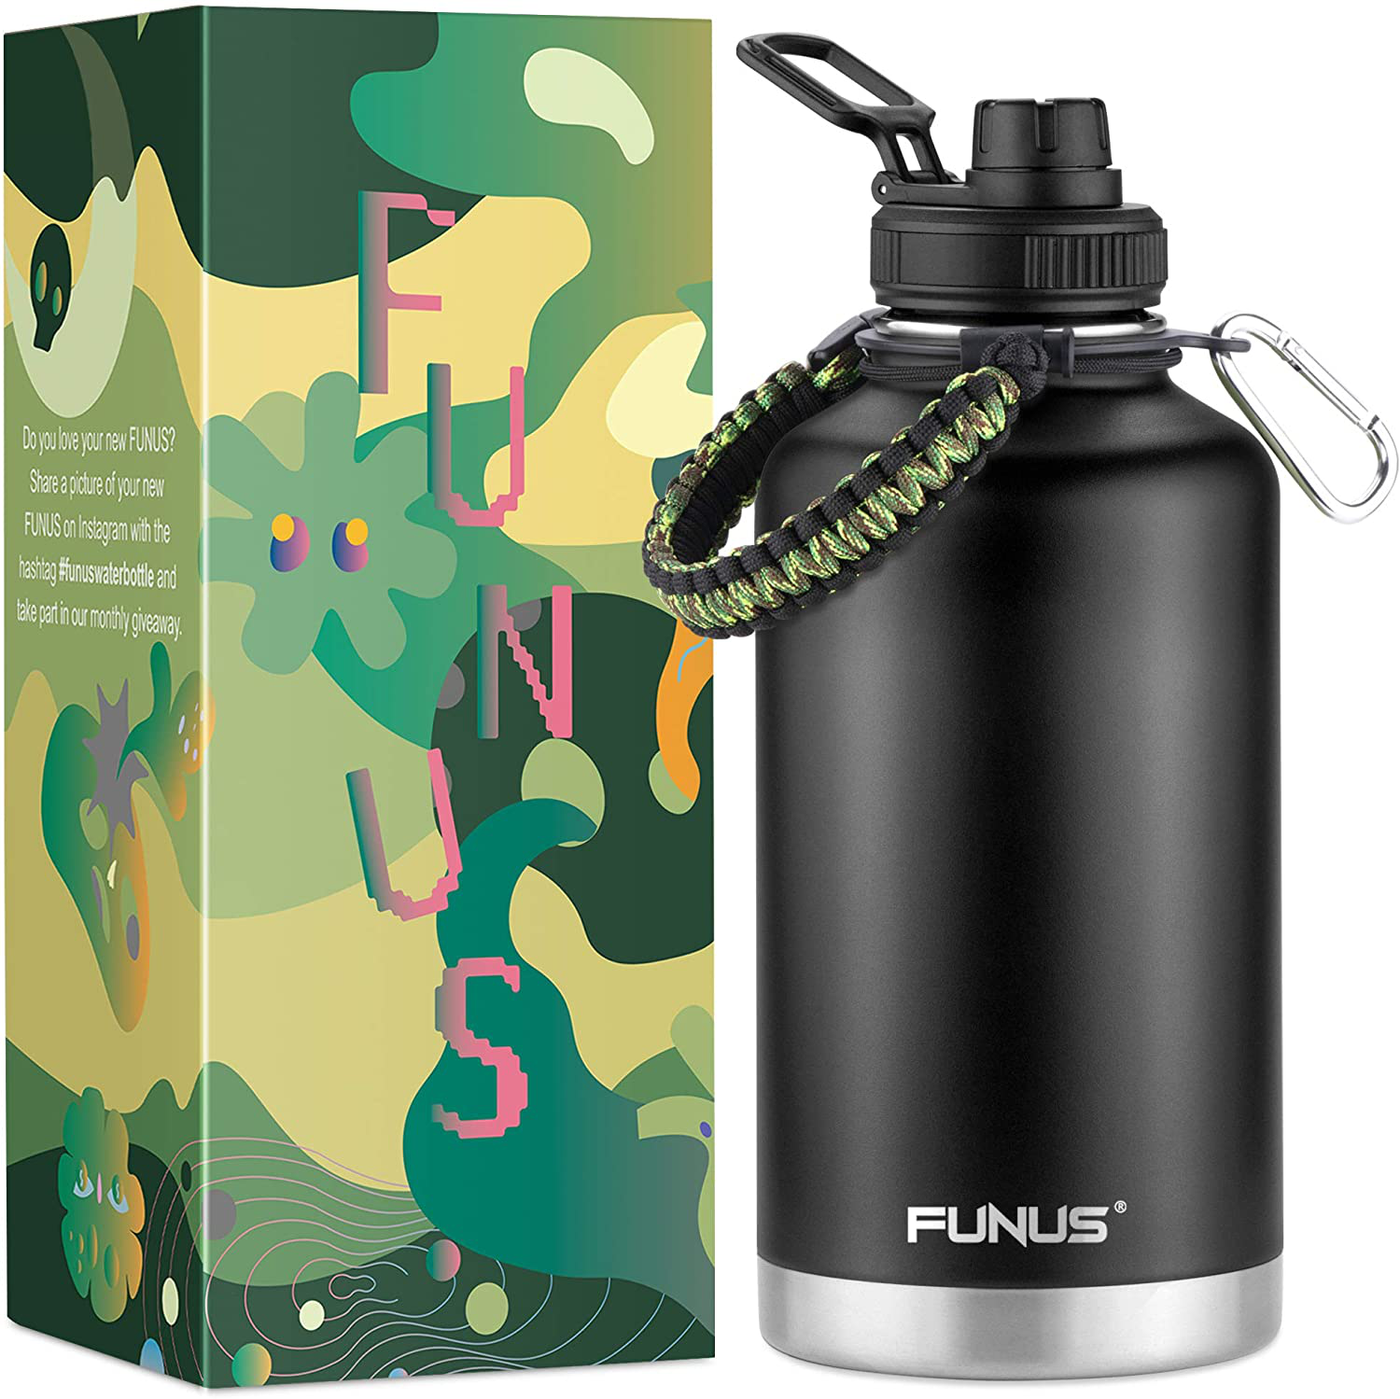 FUNUS Half Gallon Insulated Water Bottle64 oz Vacuum Stainless Steel Water Jug for Men Women Sports Fitness Outdoor Travel Camping Workout (Army Green)